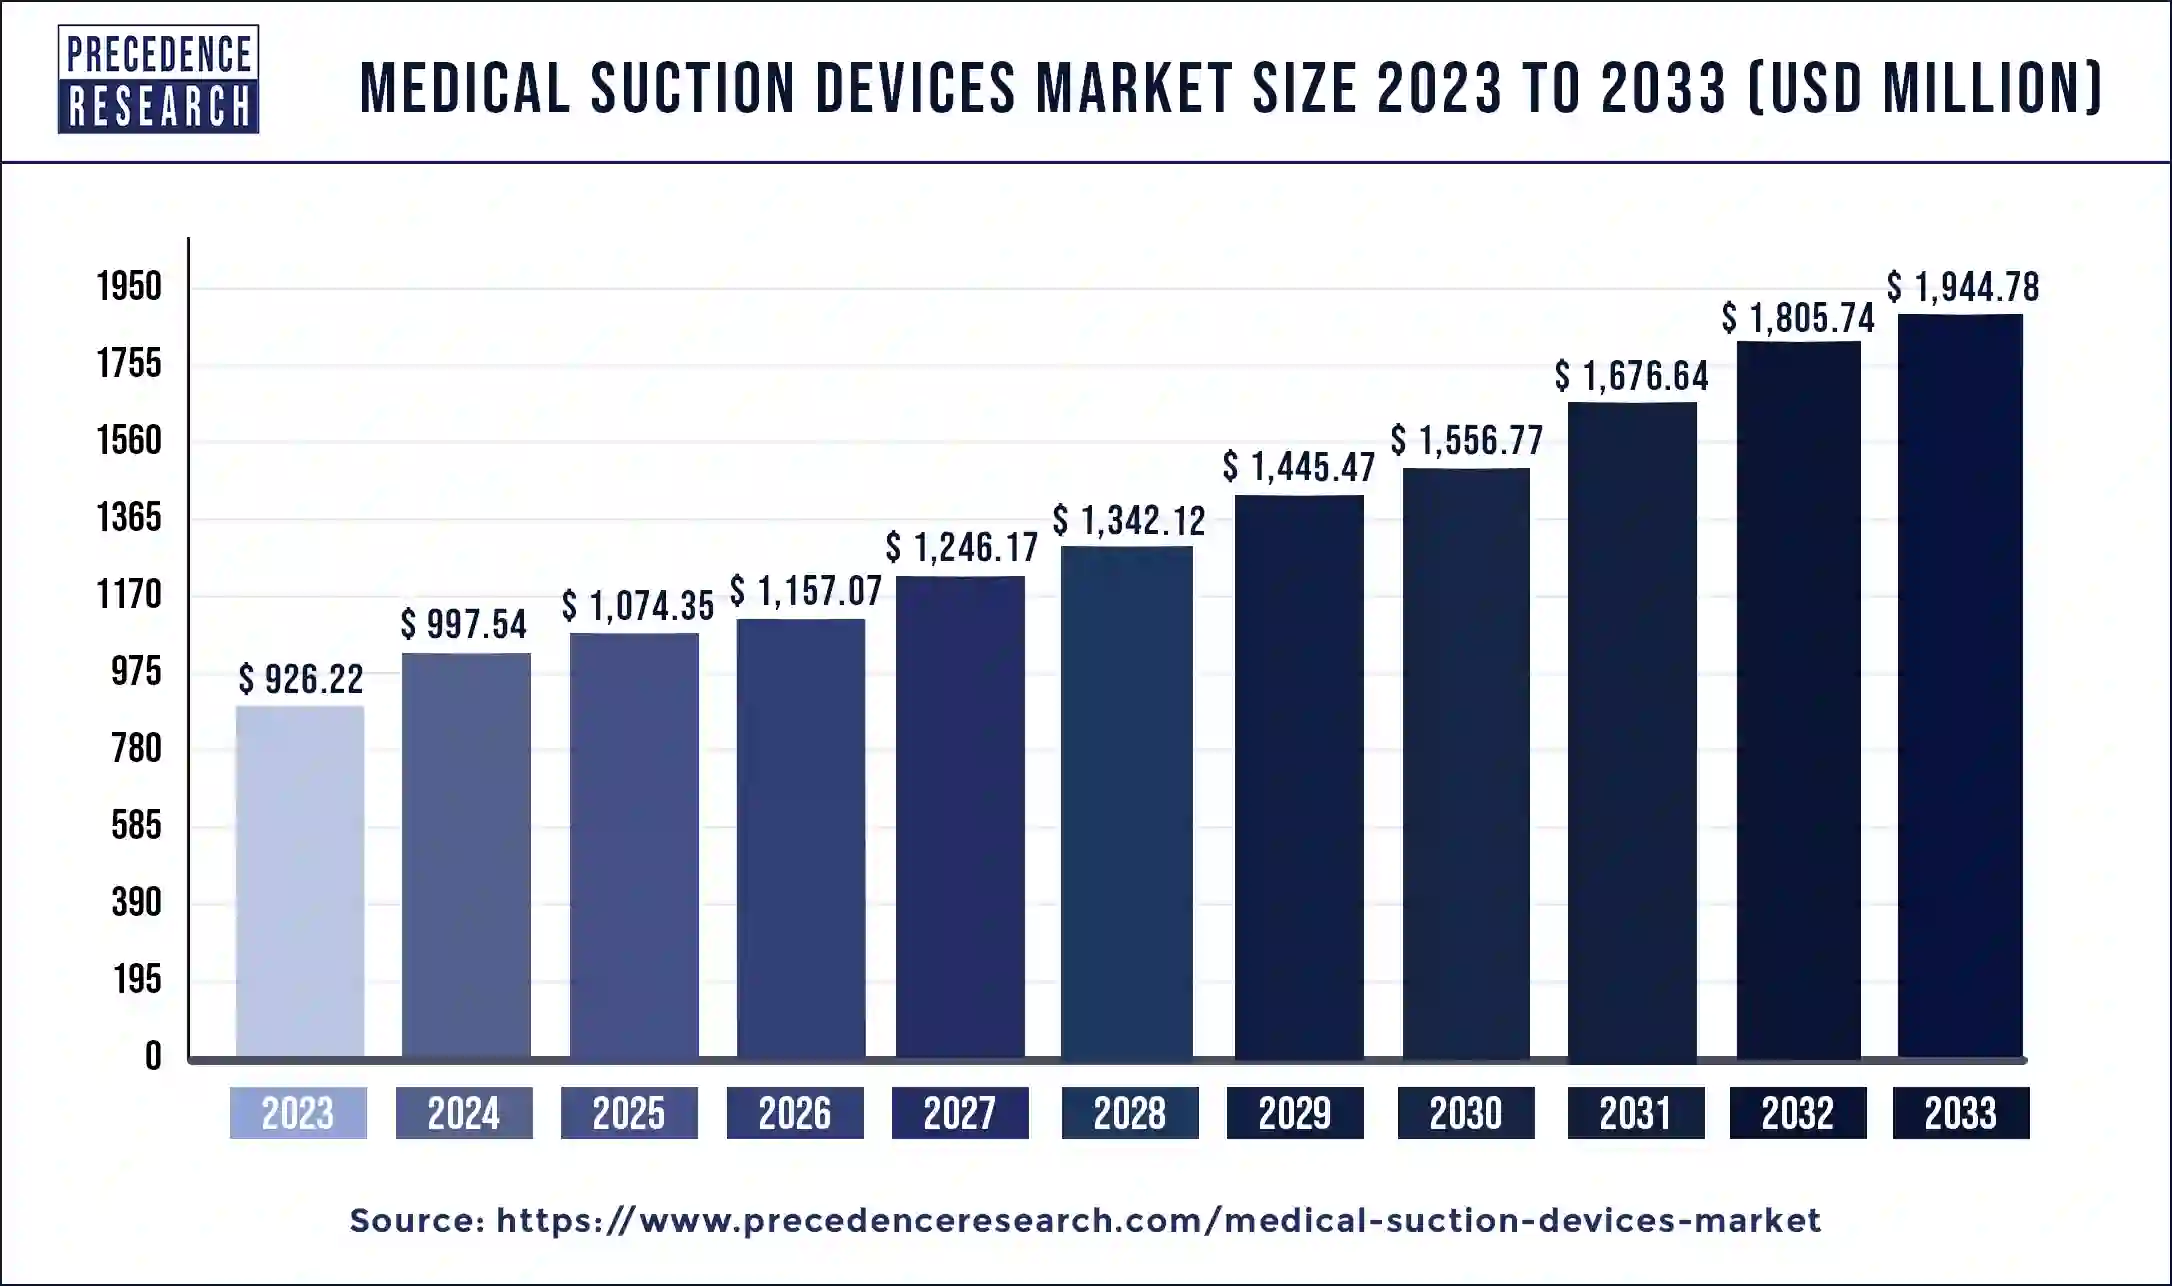 Medical Suction Devices Market Size 2024 to 2033